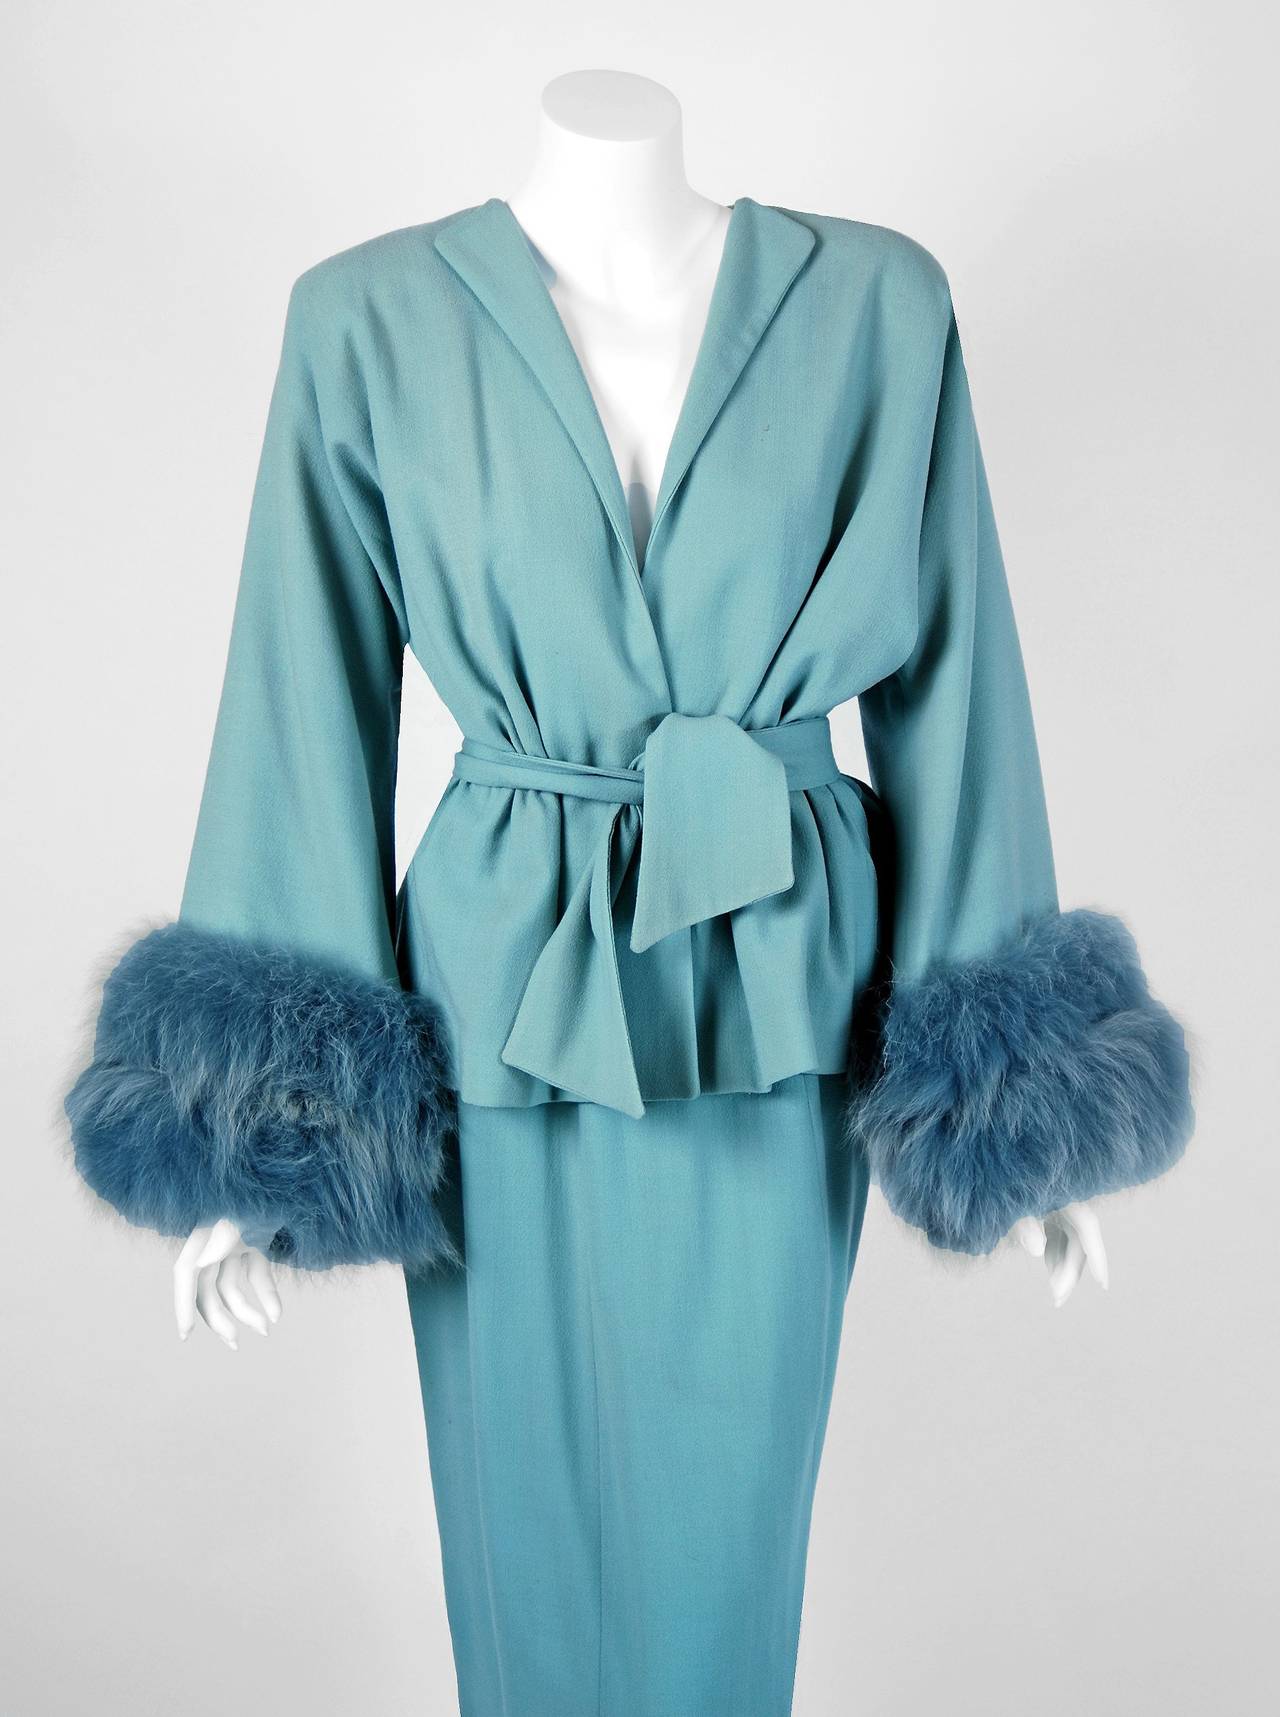 Lilli Ann was started in San Francisco in 1933 by Adolph Schuman, naming his company for his wife, Lillian. The company became known for their beautiful, elaborately designed suits and coats. This stunning ensemble is fashioned in a rich fully-lined